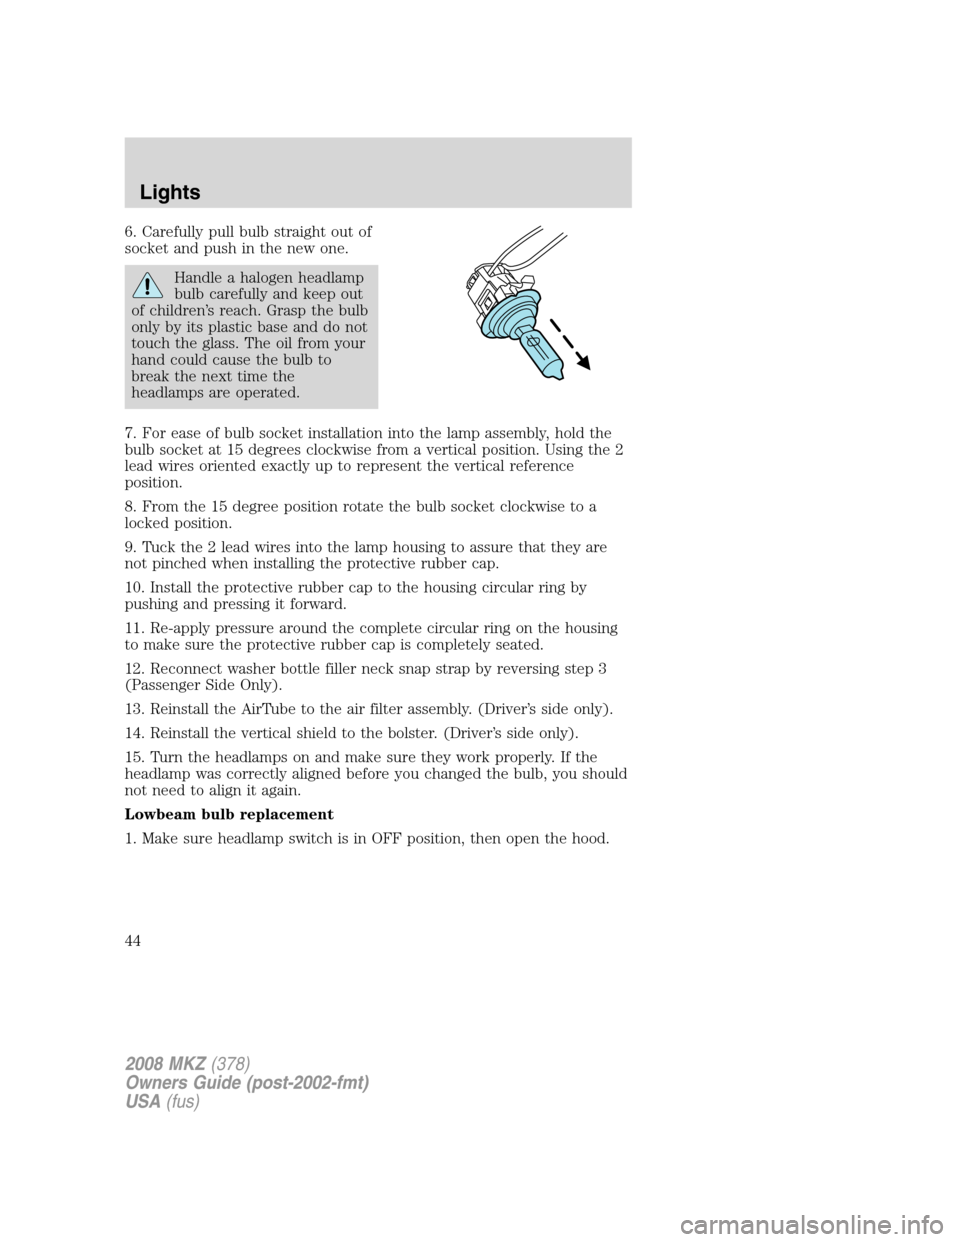 LINCOLN MKZ 2008 Service Manual 6. Carefully pull bulb straight out of
socket and push in the new one.
Handle a halogen headlamp
bulb carefully and keep out
of children’s reach. Grasp the bulb
only by its plastic base and do not
t